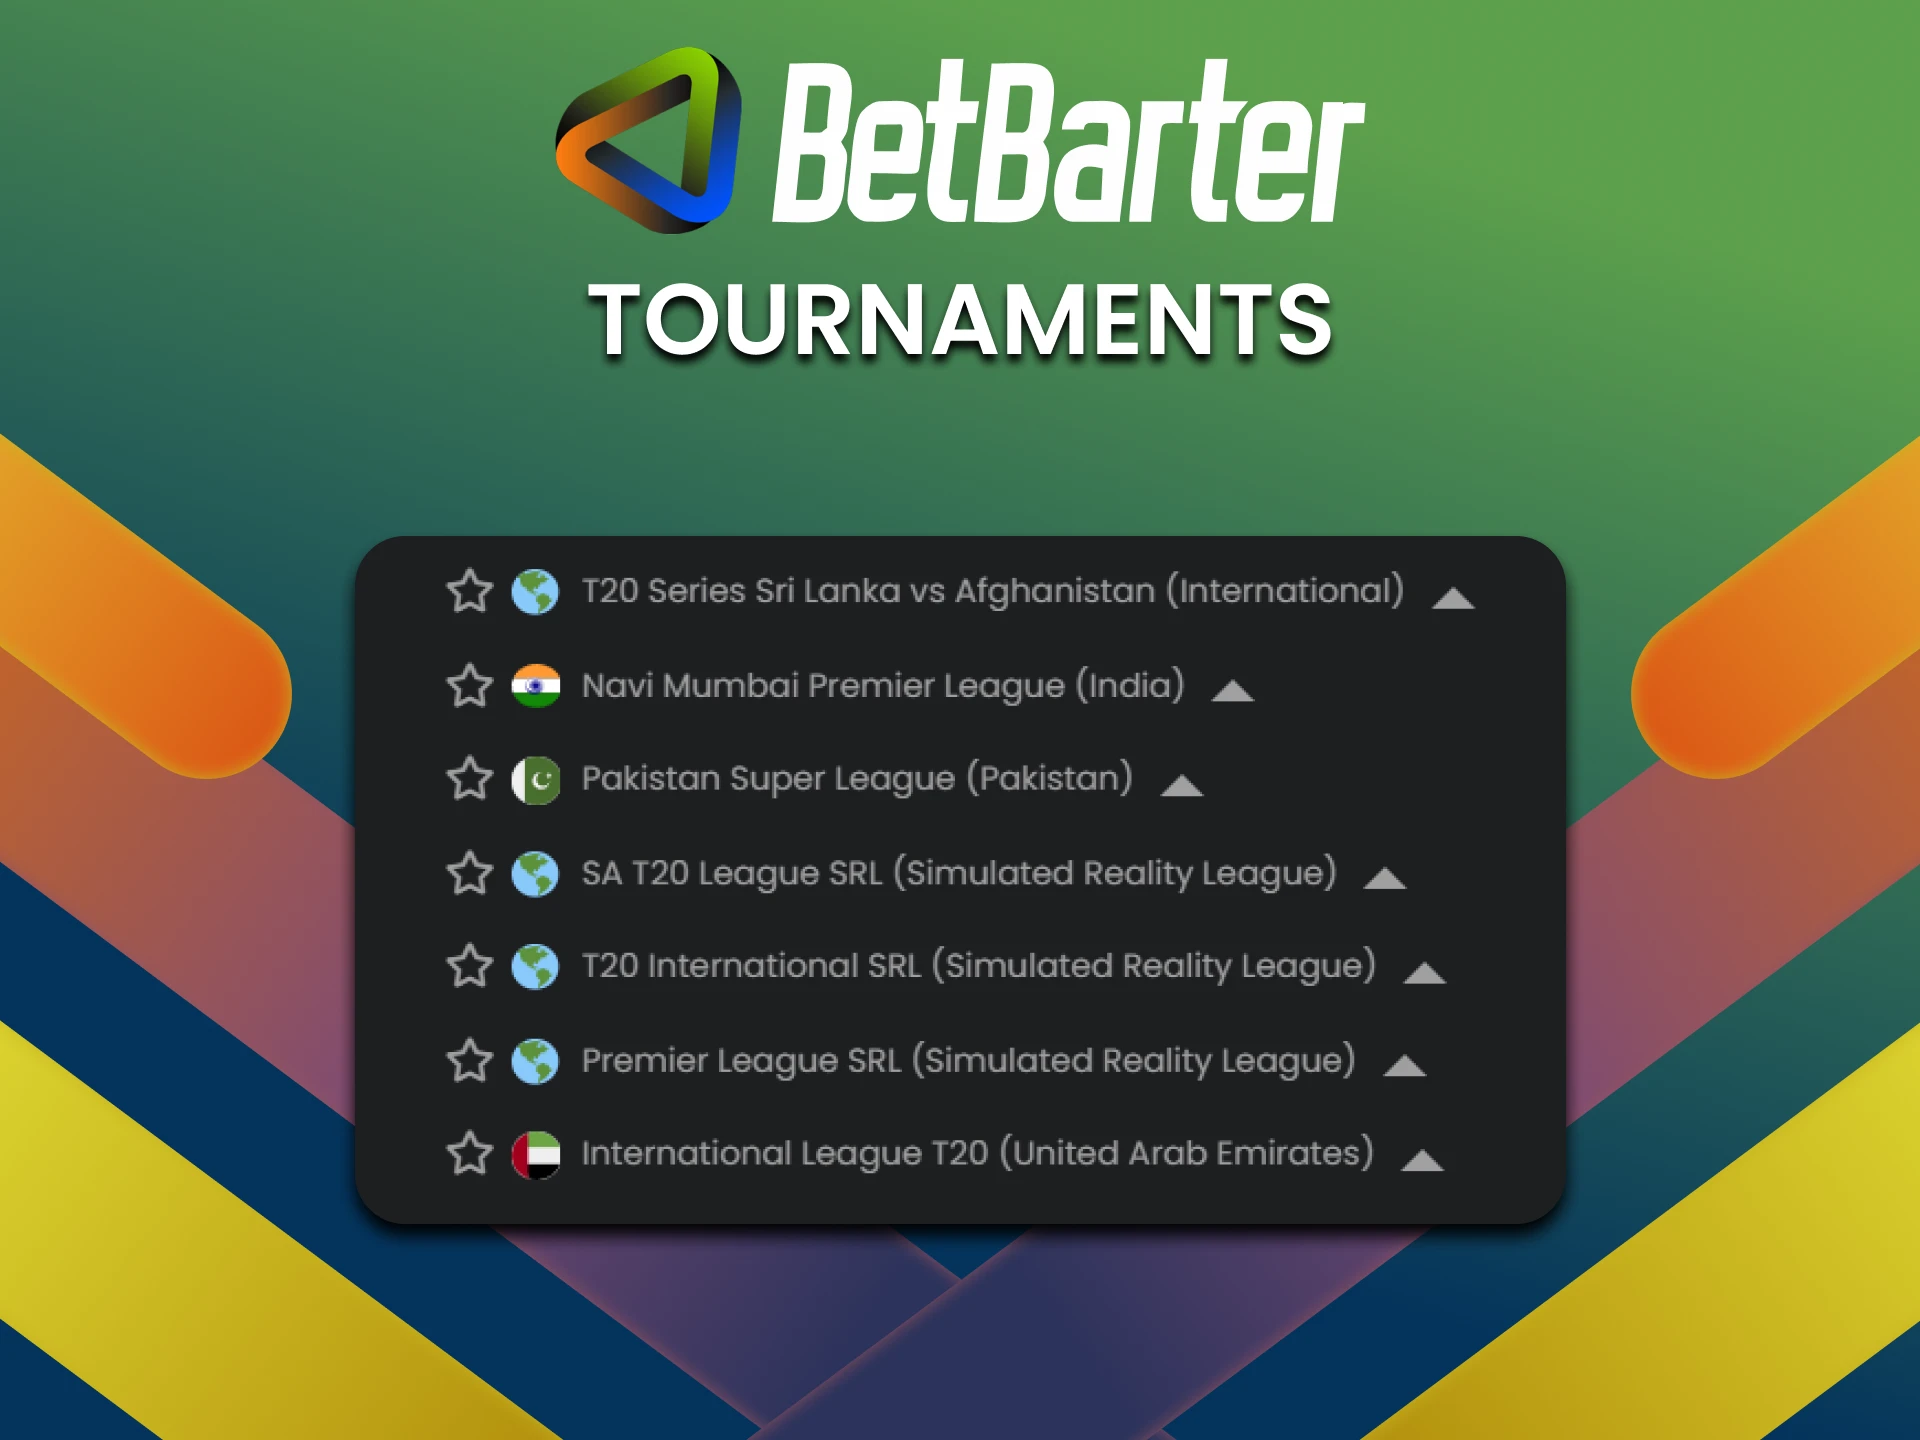 We will tell you what tournaments there are for betting on cricket from BetBarter.